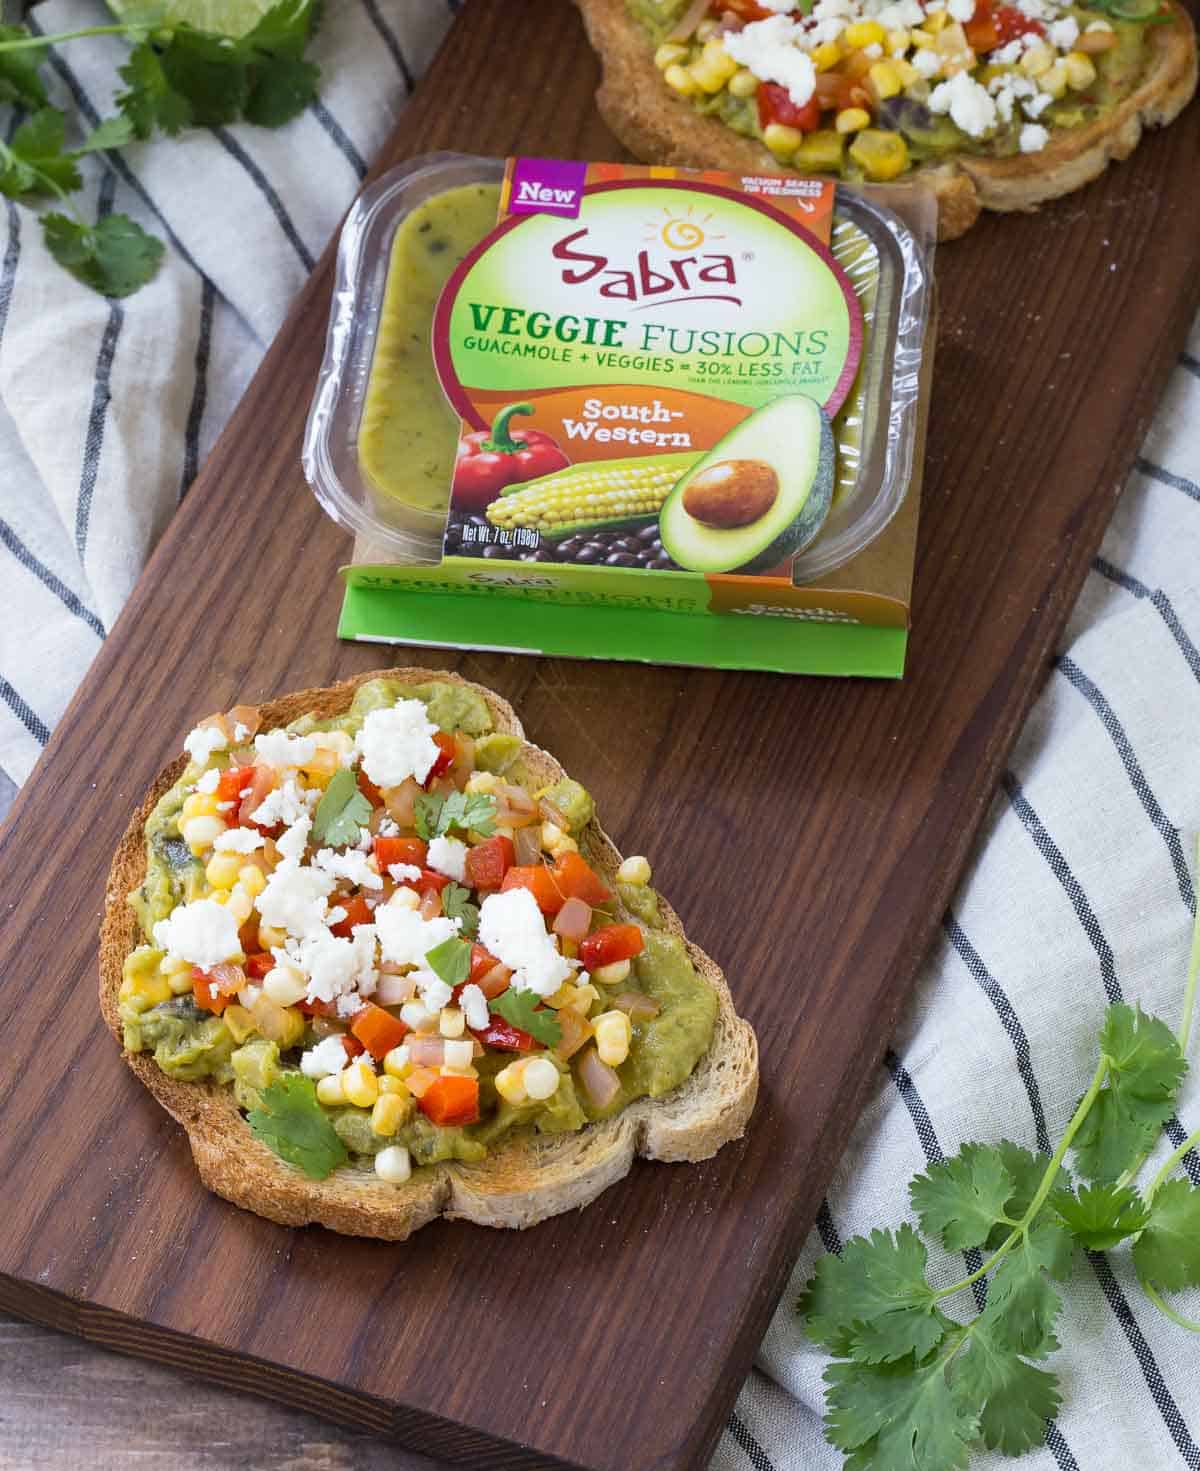 Package of Sabra Veggie Fusions Guacamole on board with toasts.